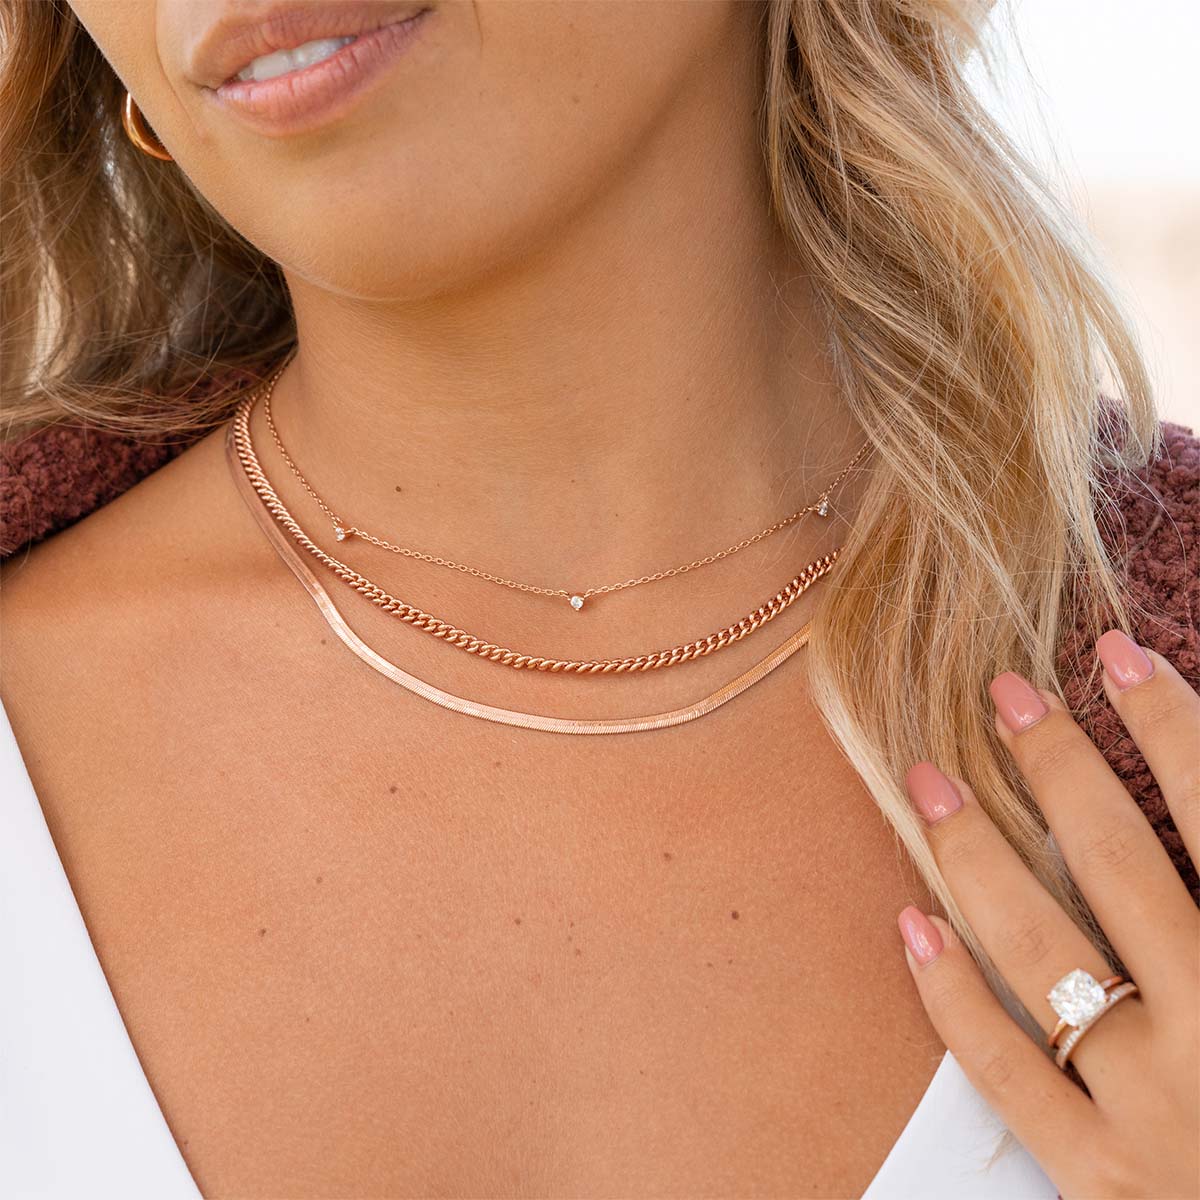 Womens cute layered rose gold necklaces